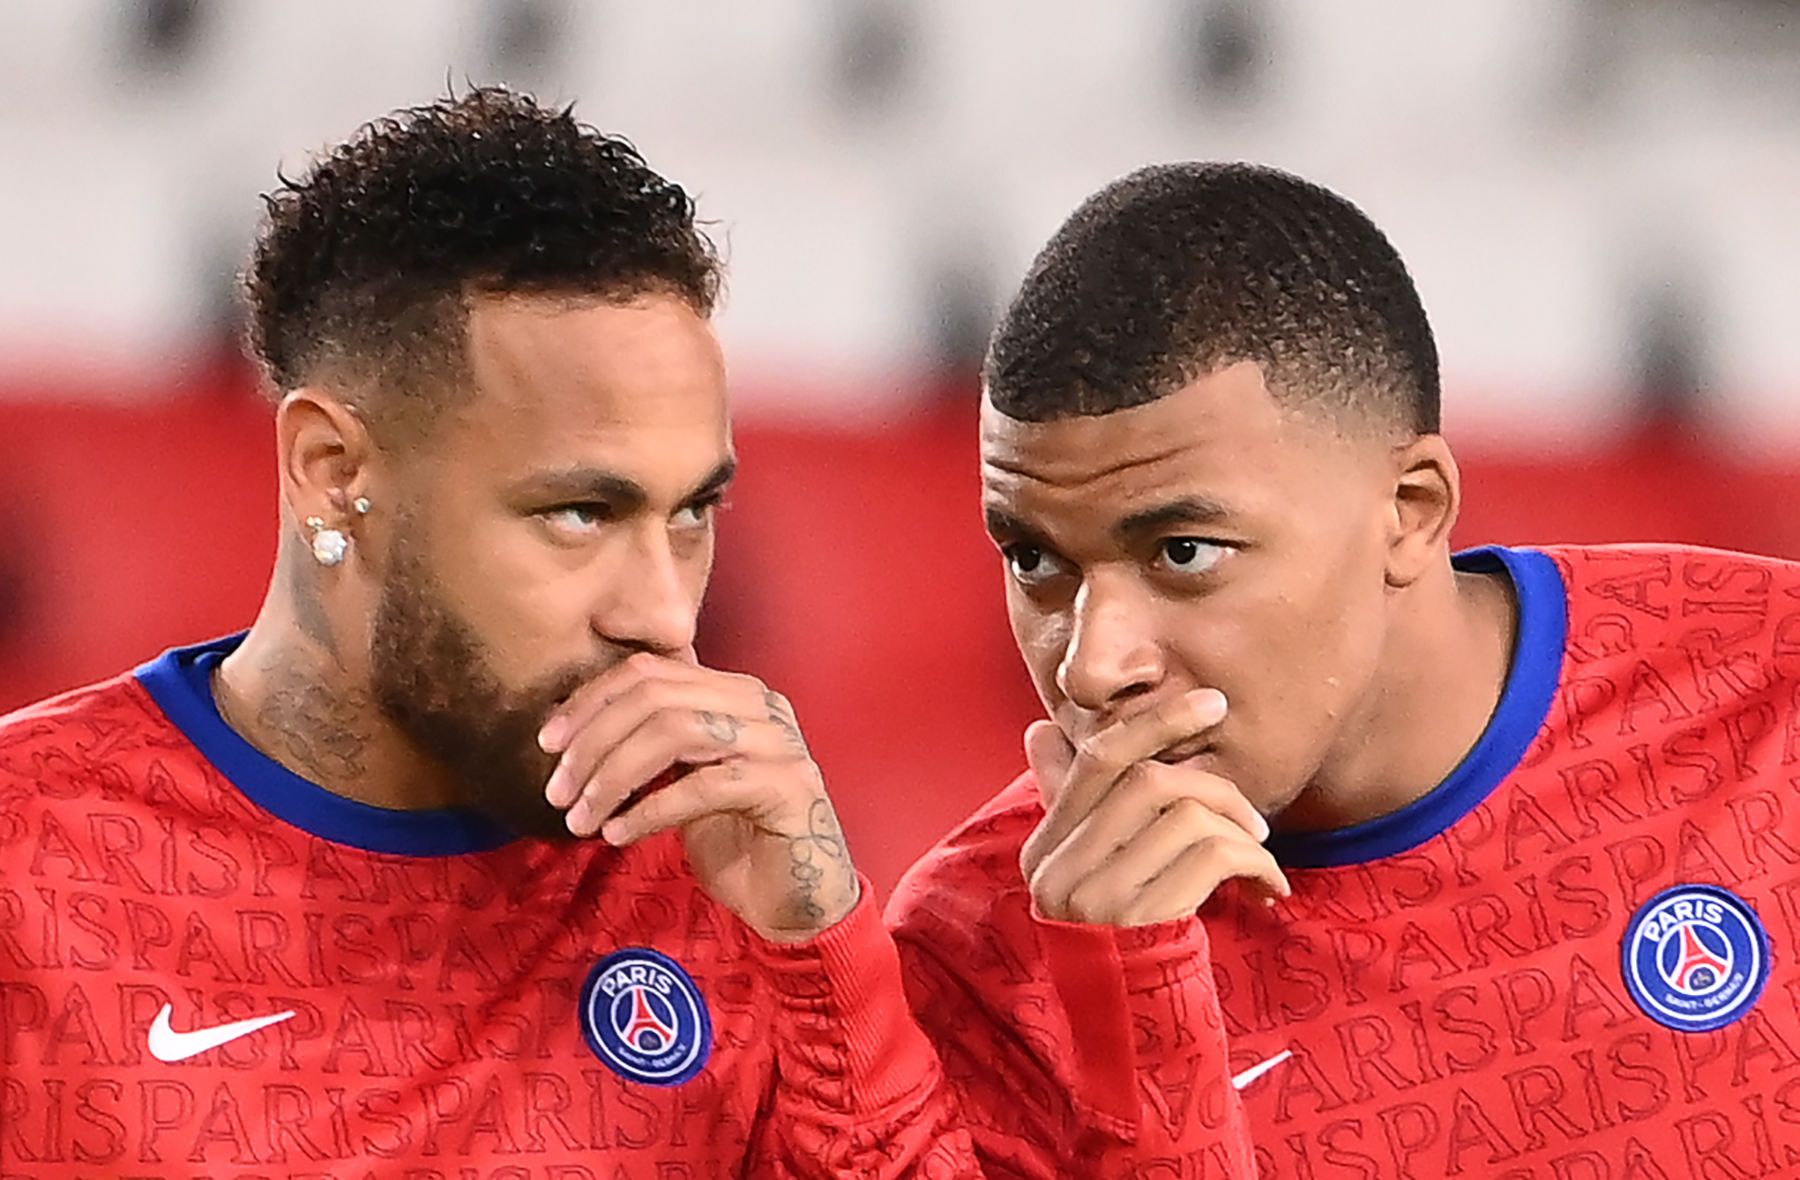 Neymar Wanting an Extension Could Foreshadow Mbappé's Desire to Stay at